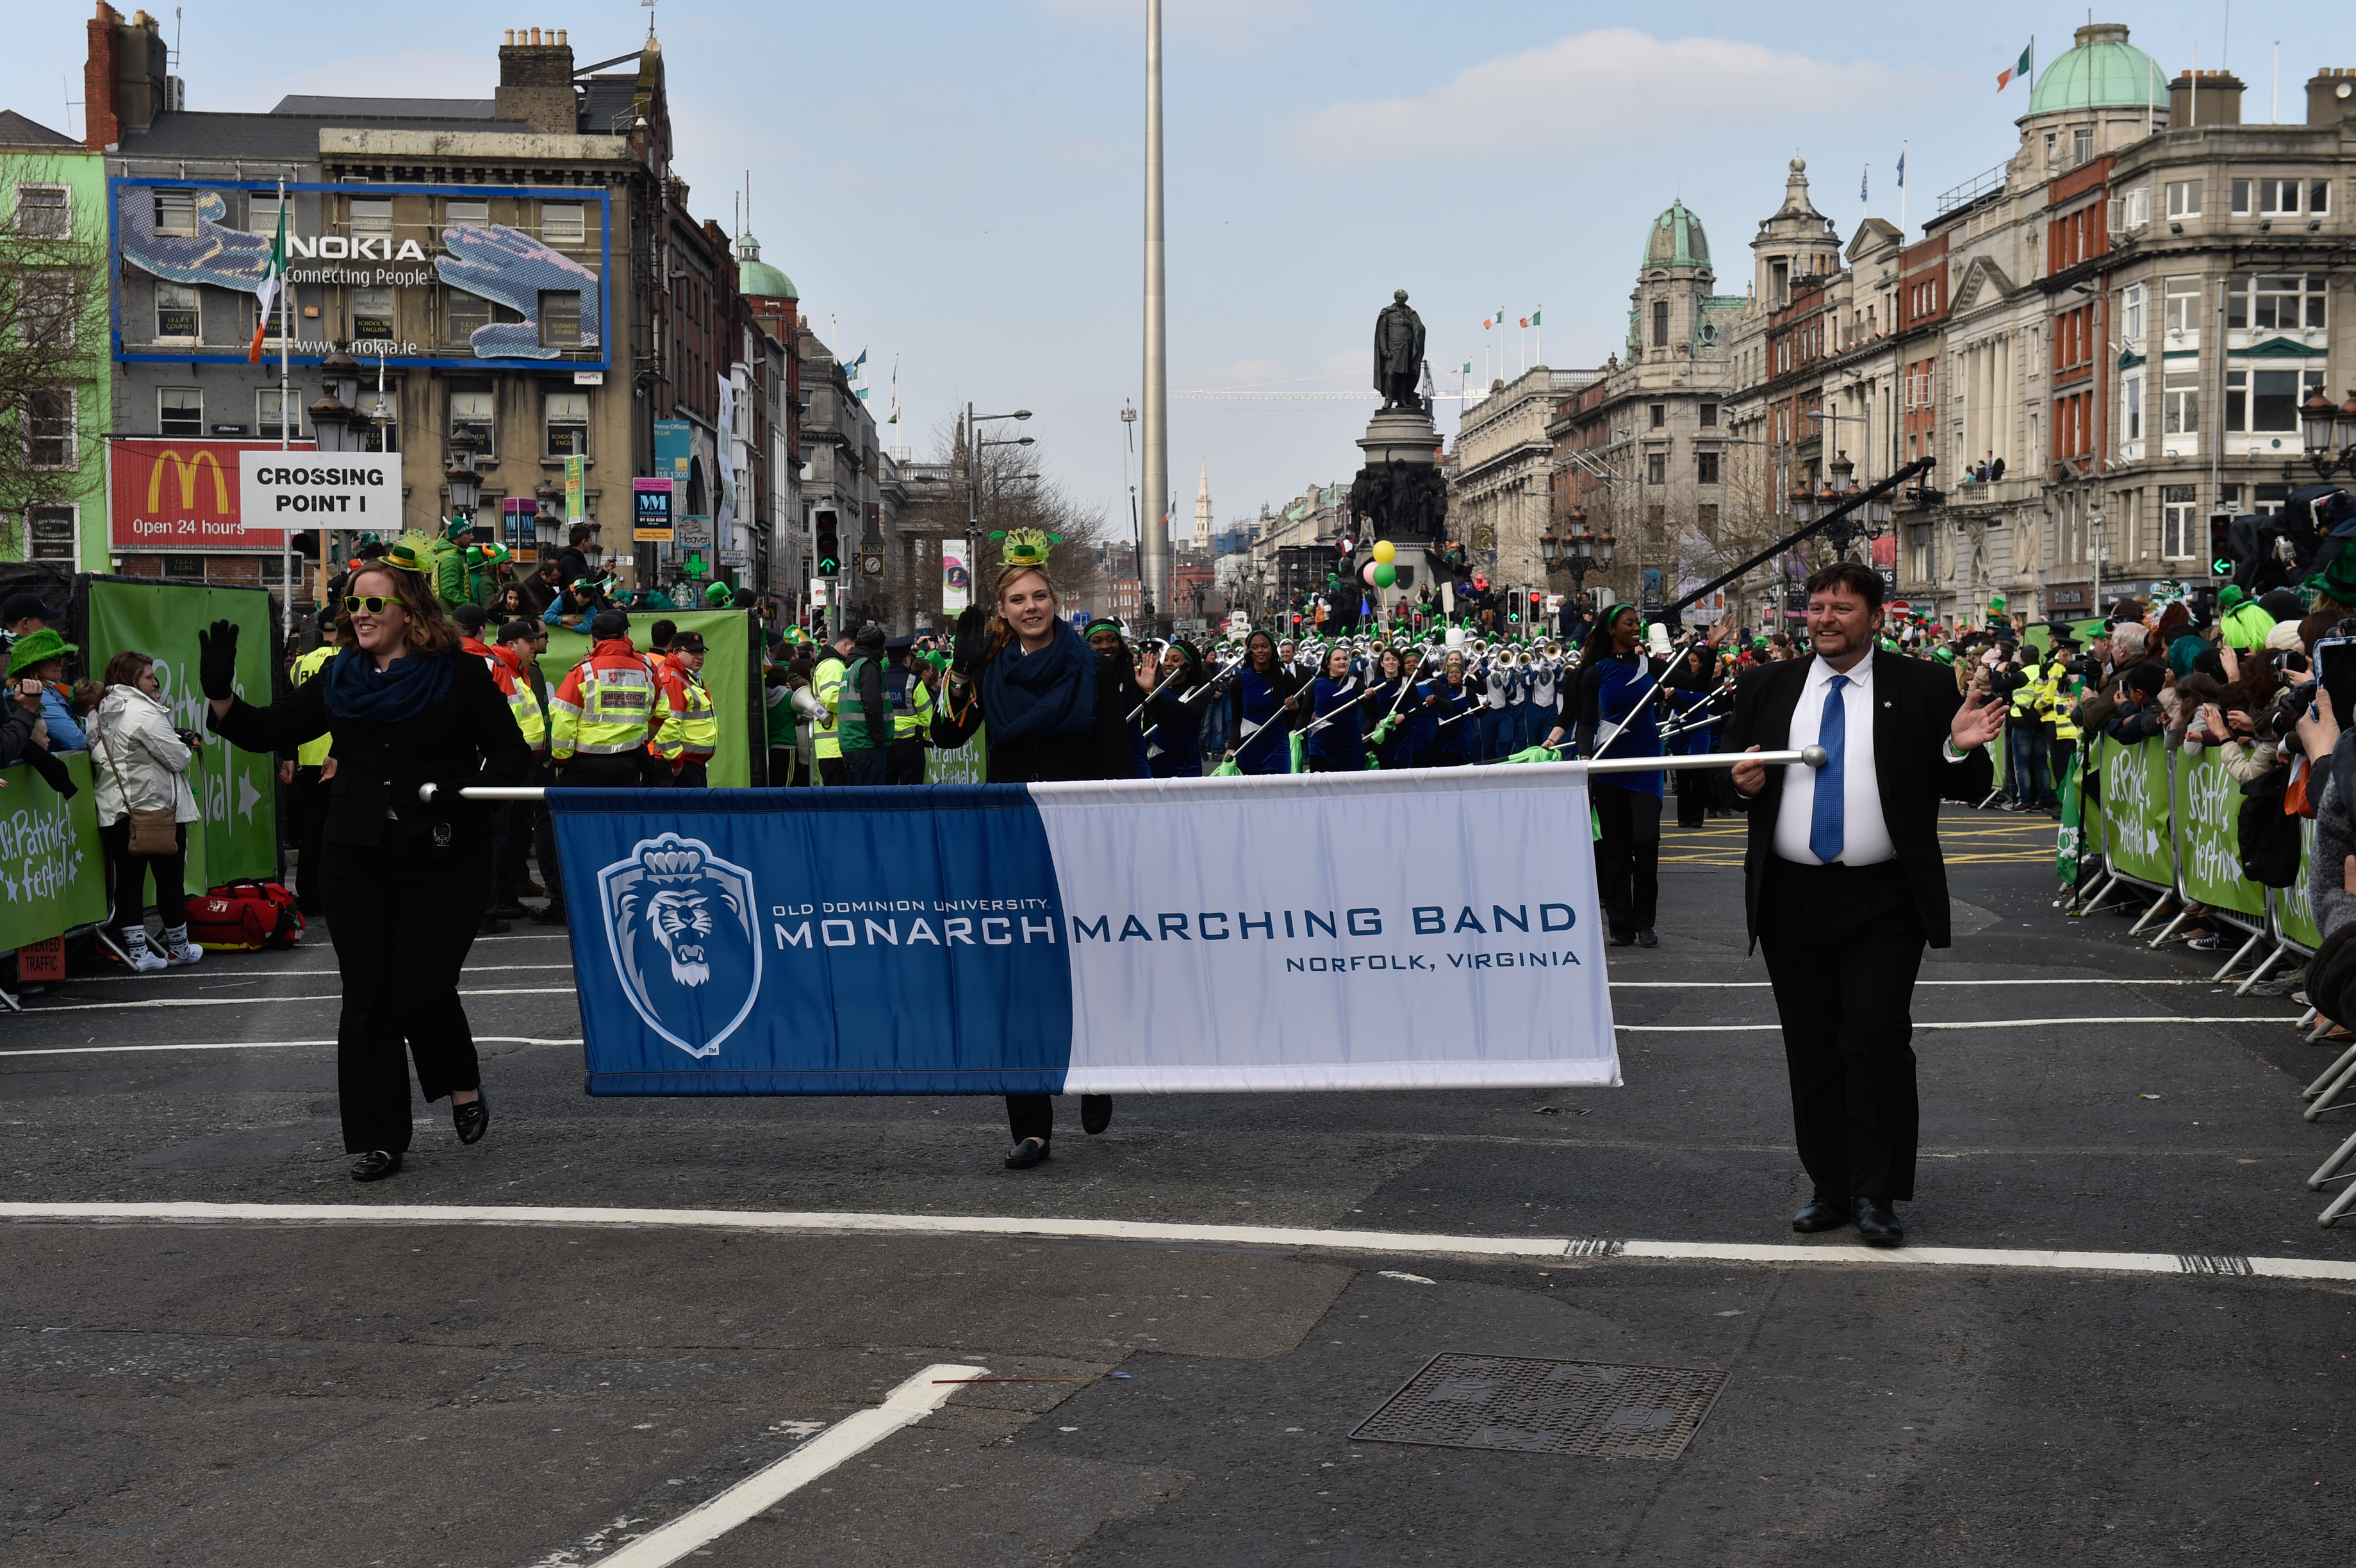 Monarch marching Band in Ireland